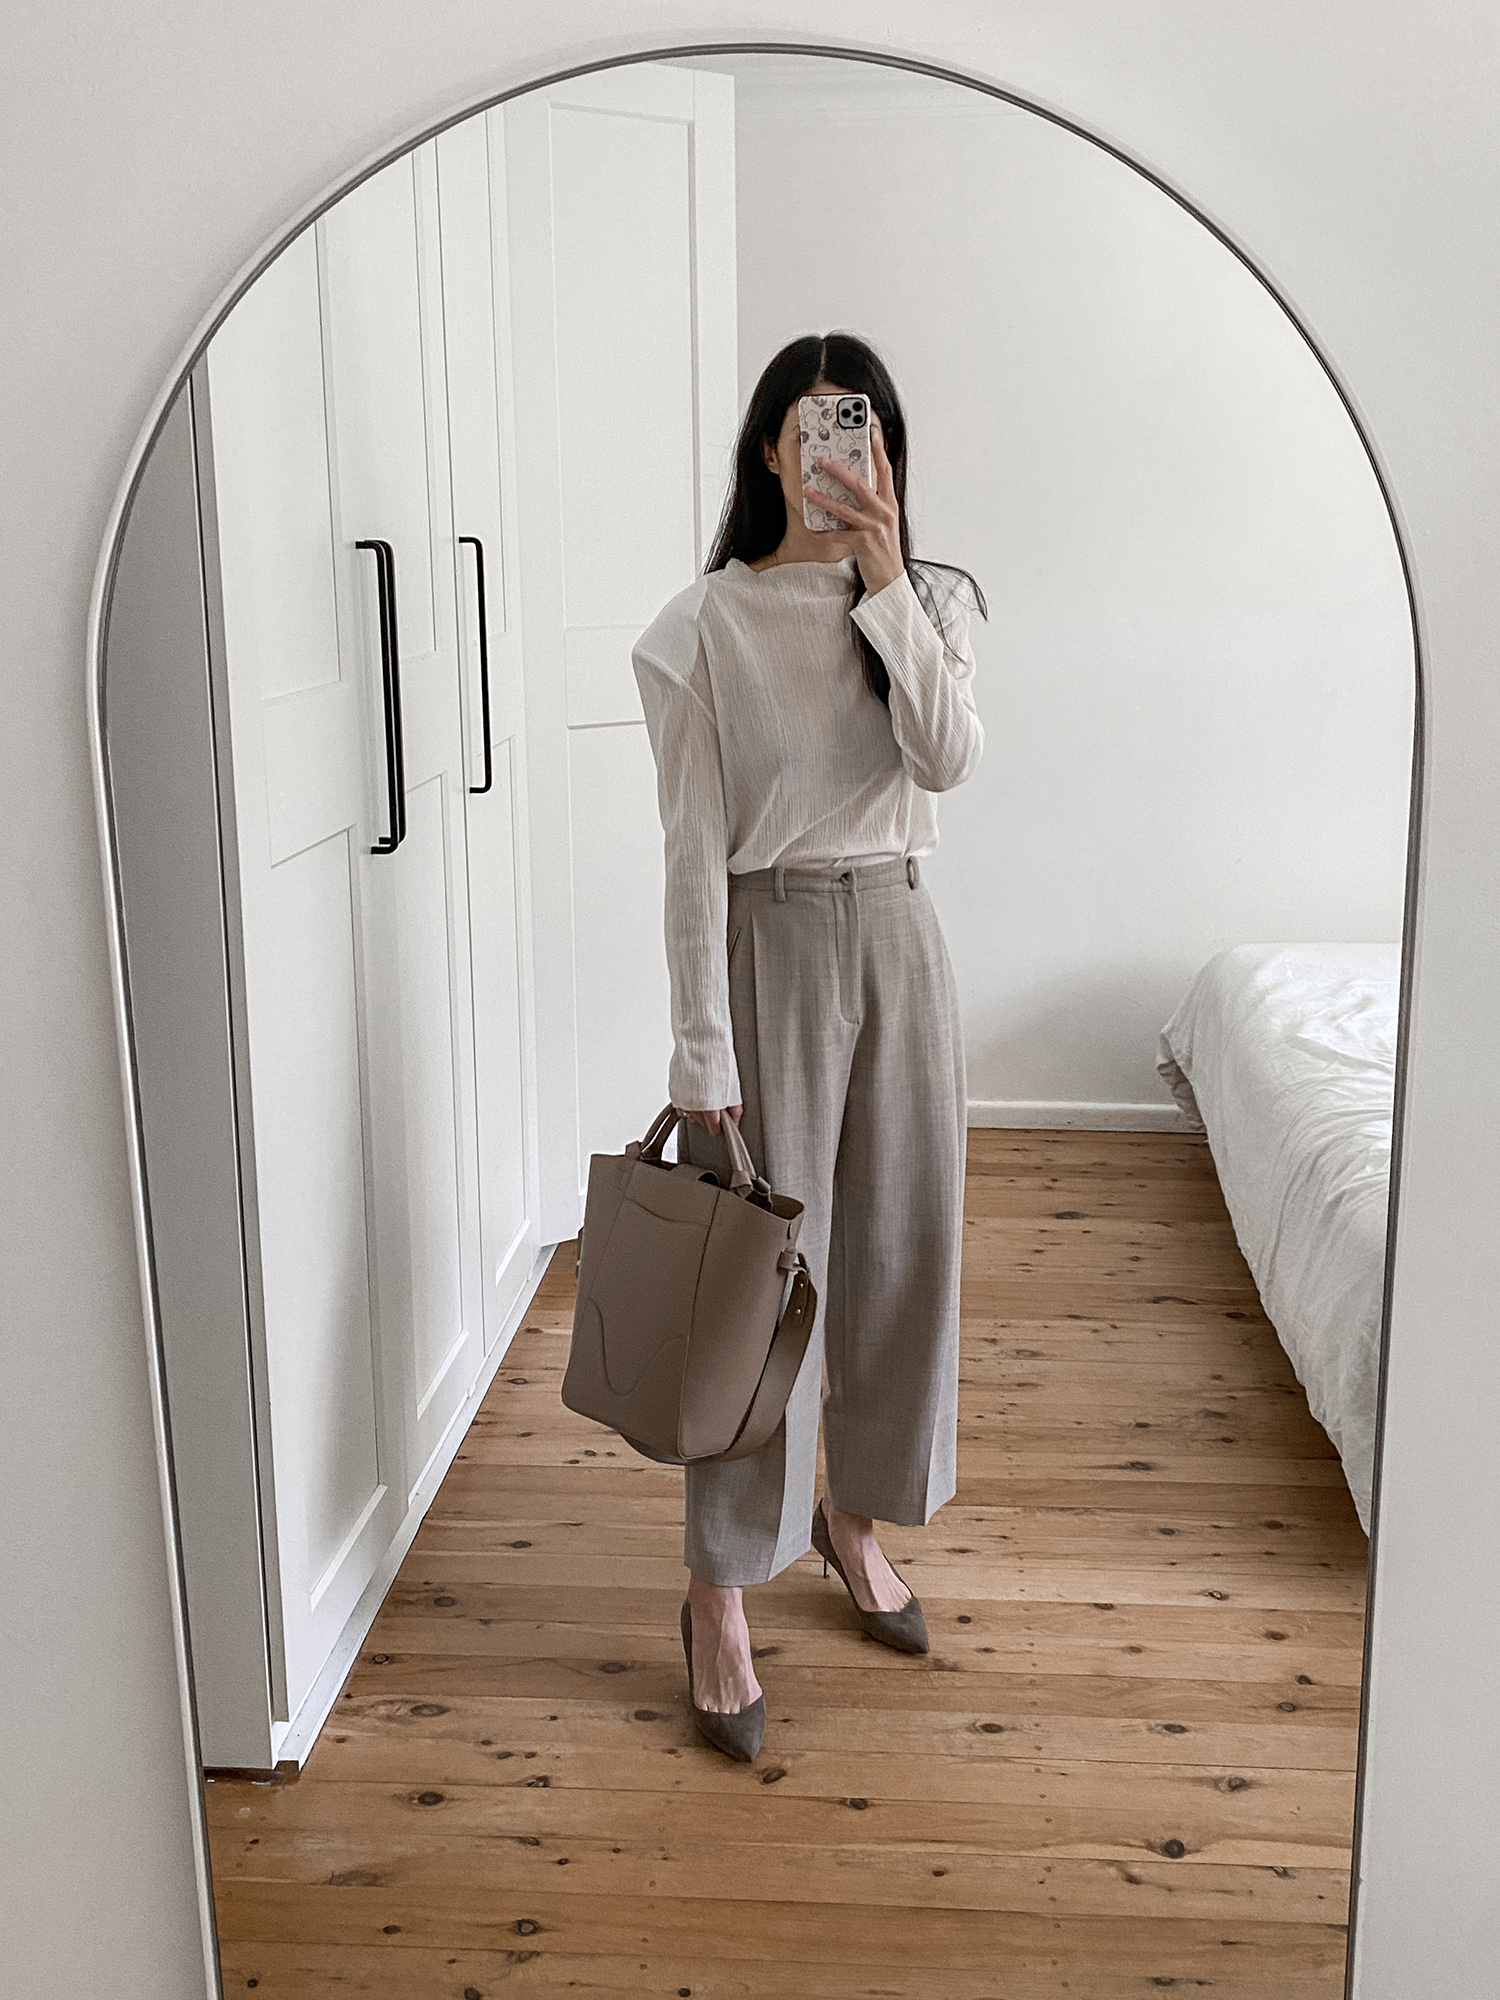 Workwear outfit ideas wearing Tibi top Facade Pattern trousers and Sarah Flint Perfect pumps